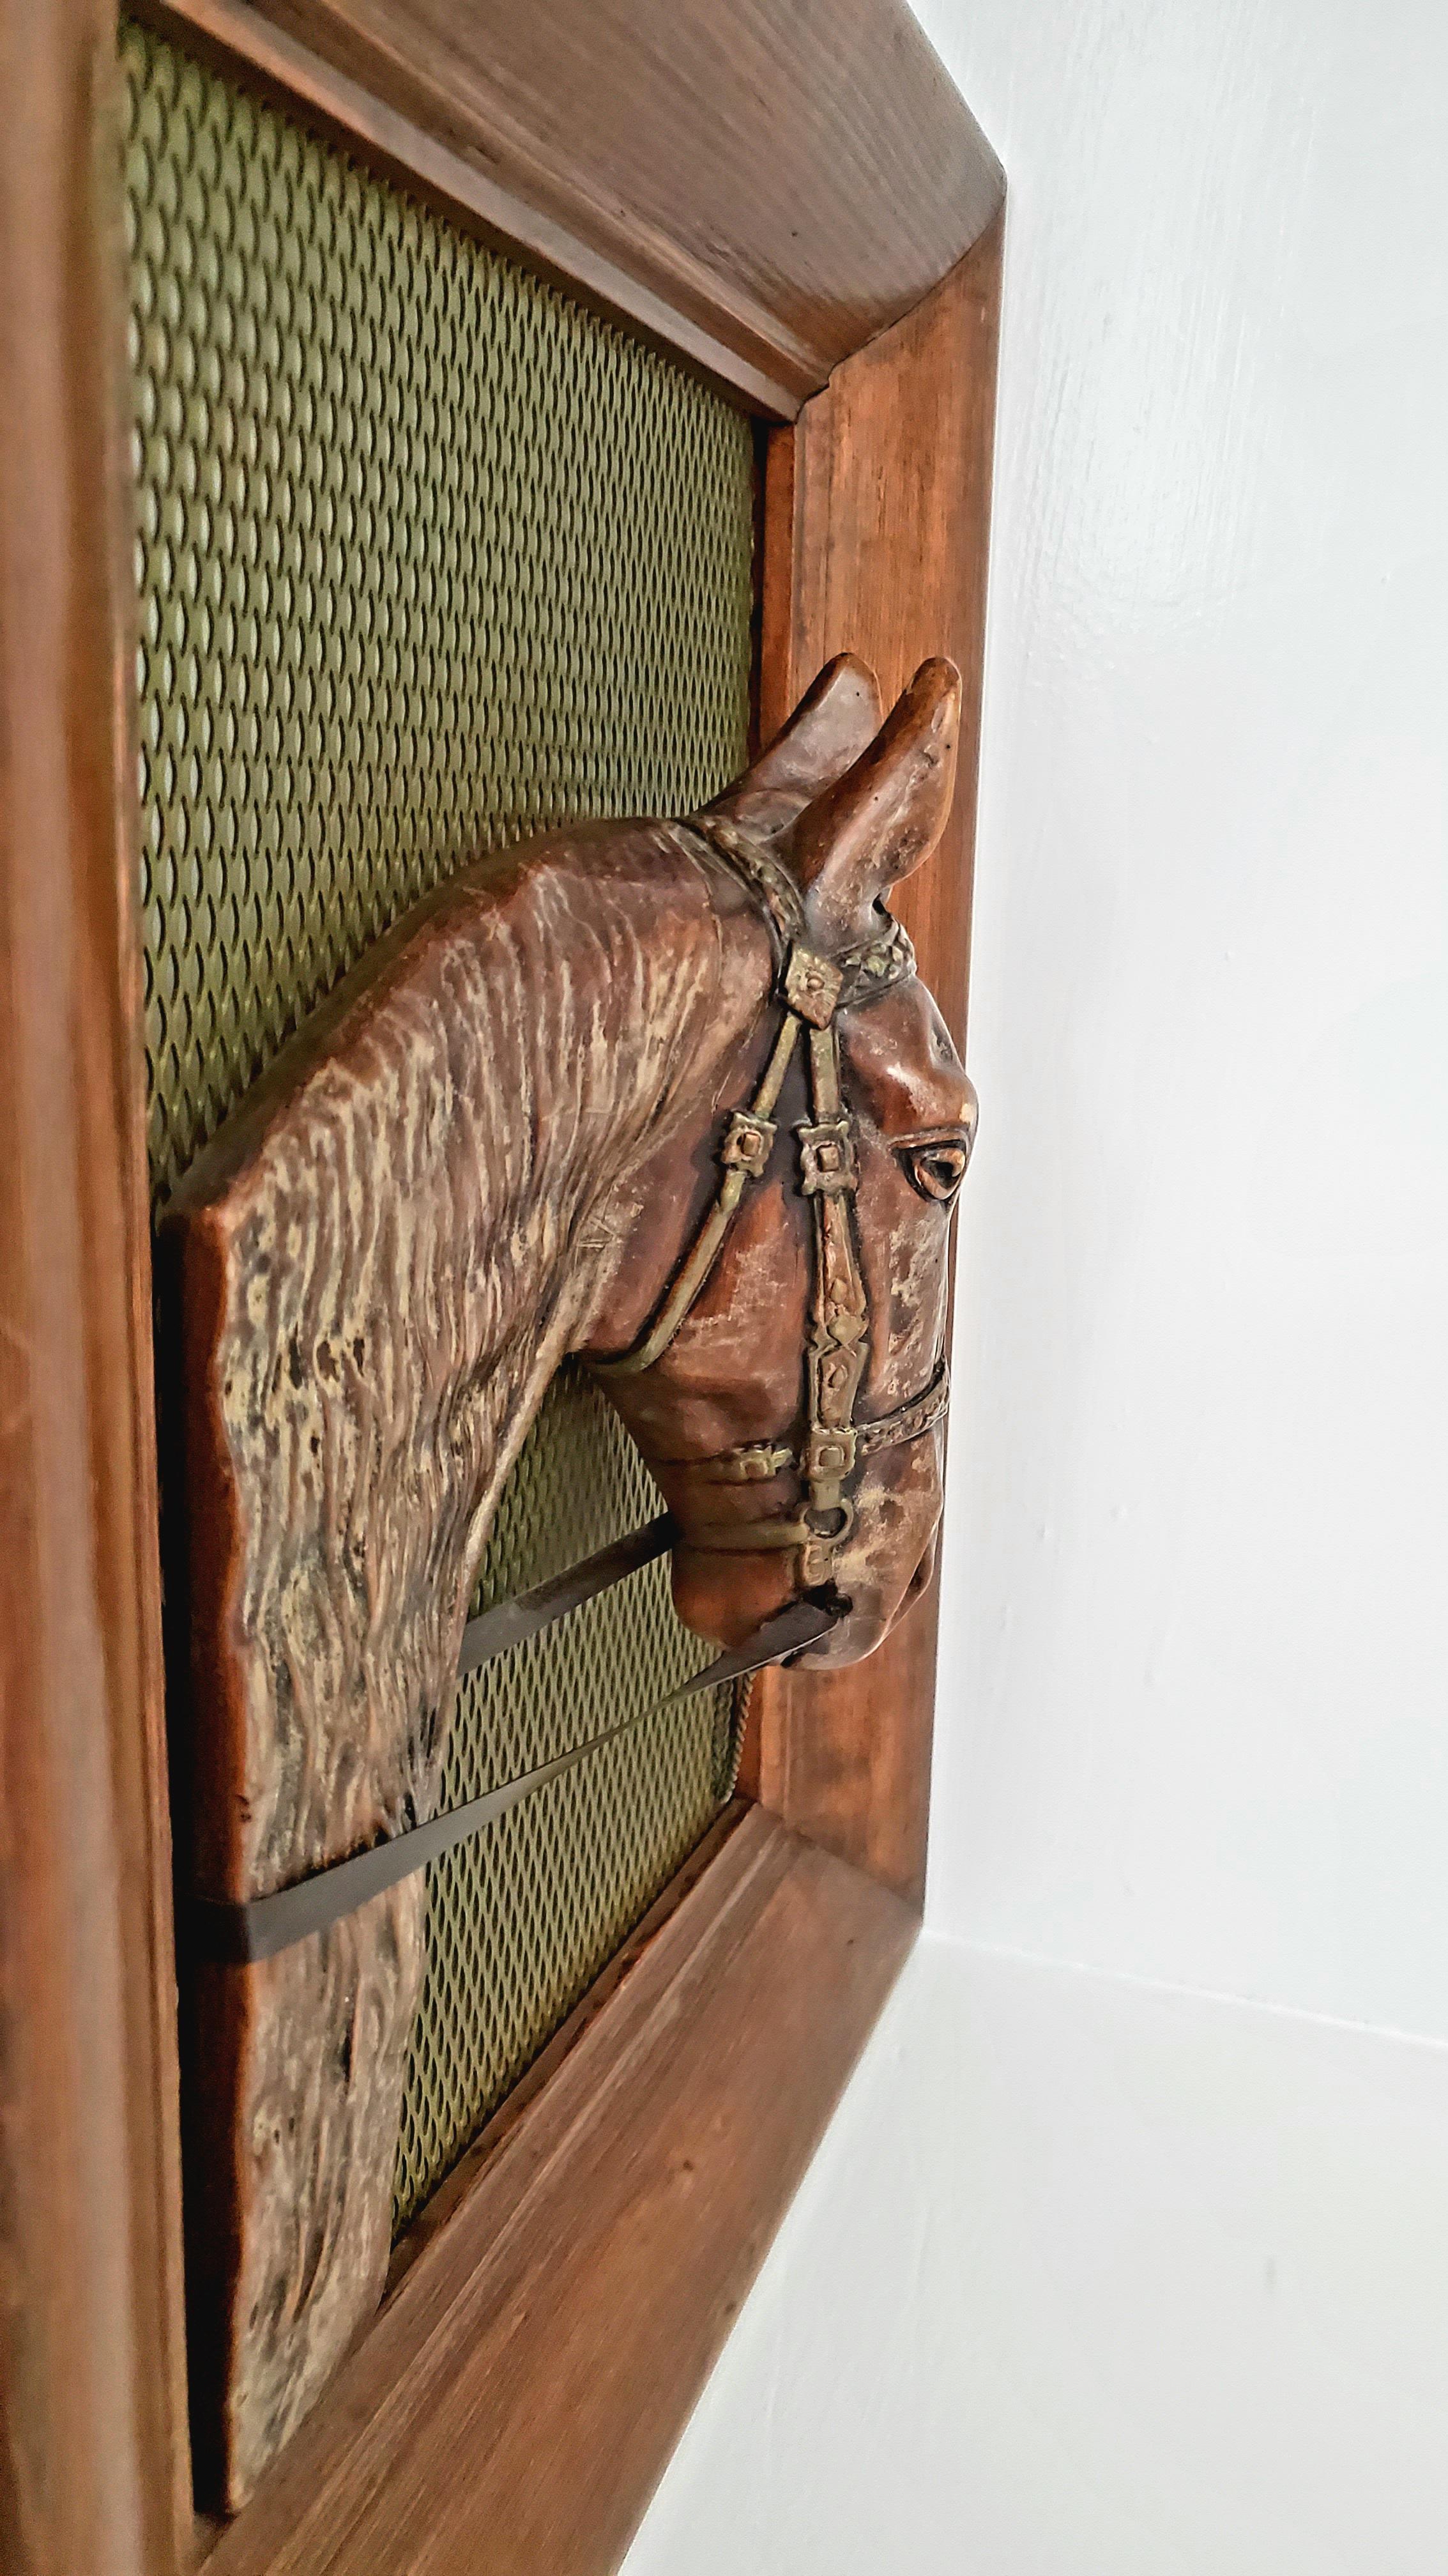 Unknown Antique Horse Sculpture  Framed Copper Horse Head in Relief For Sale